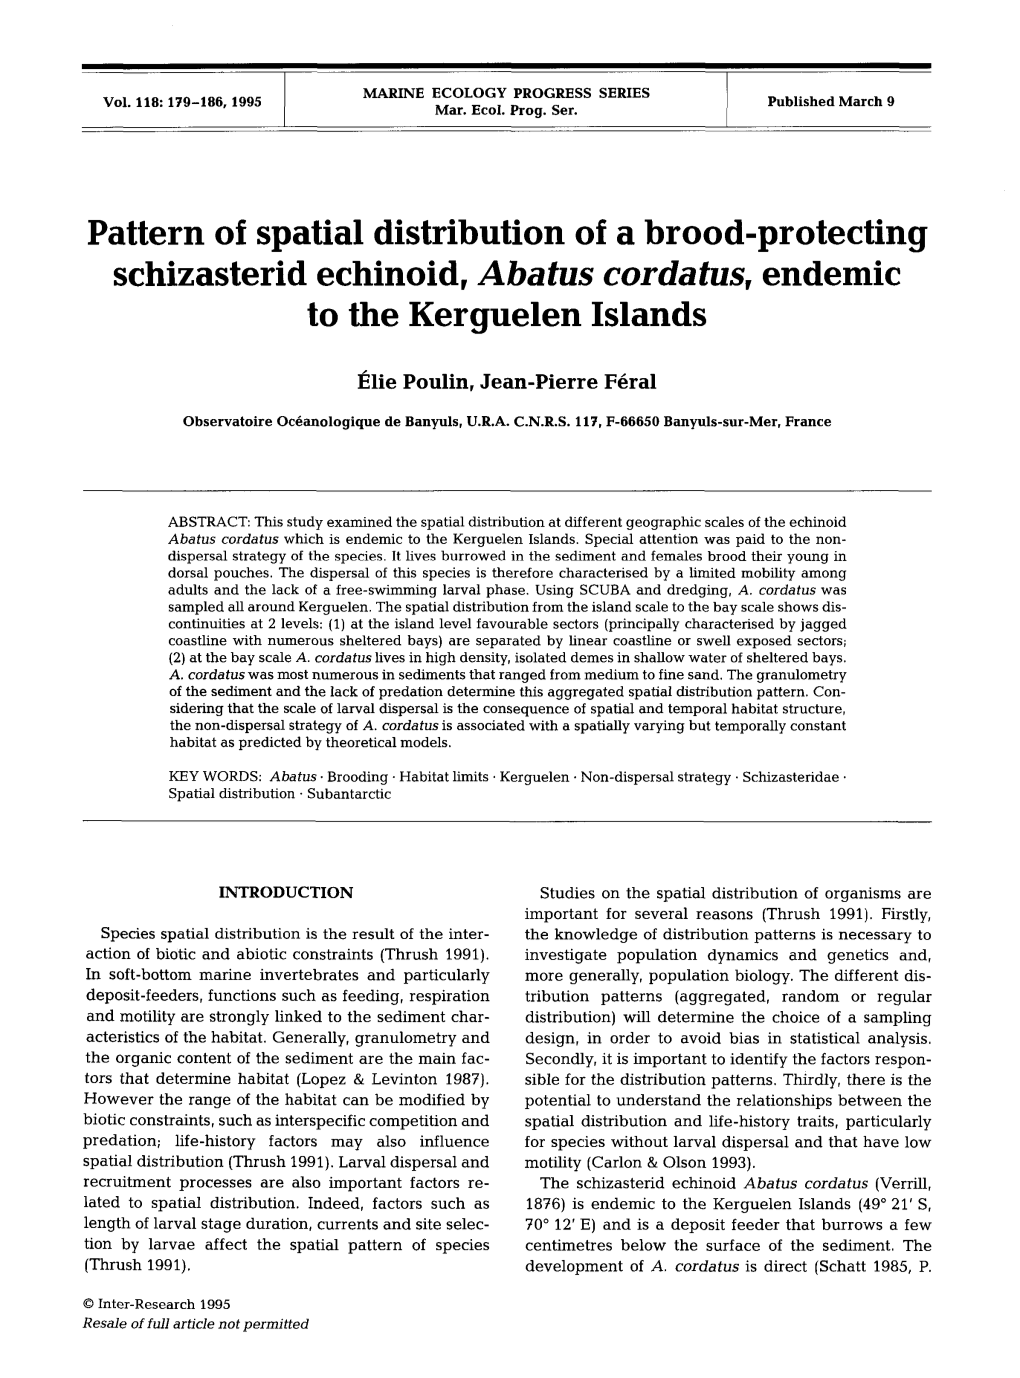 Pattern of Spatial Distribution of a Brood-Protecting Schizasterid Echinoid,Abatus Cordatus, Endemic to the Kerguelen Islands